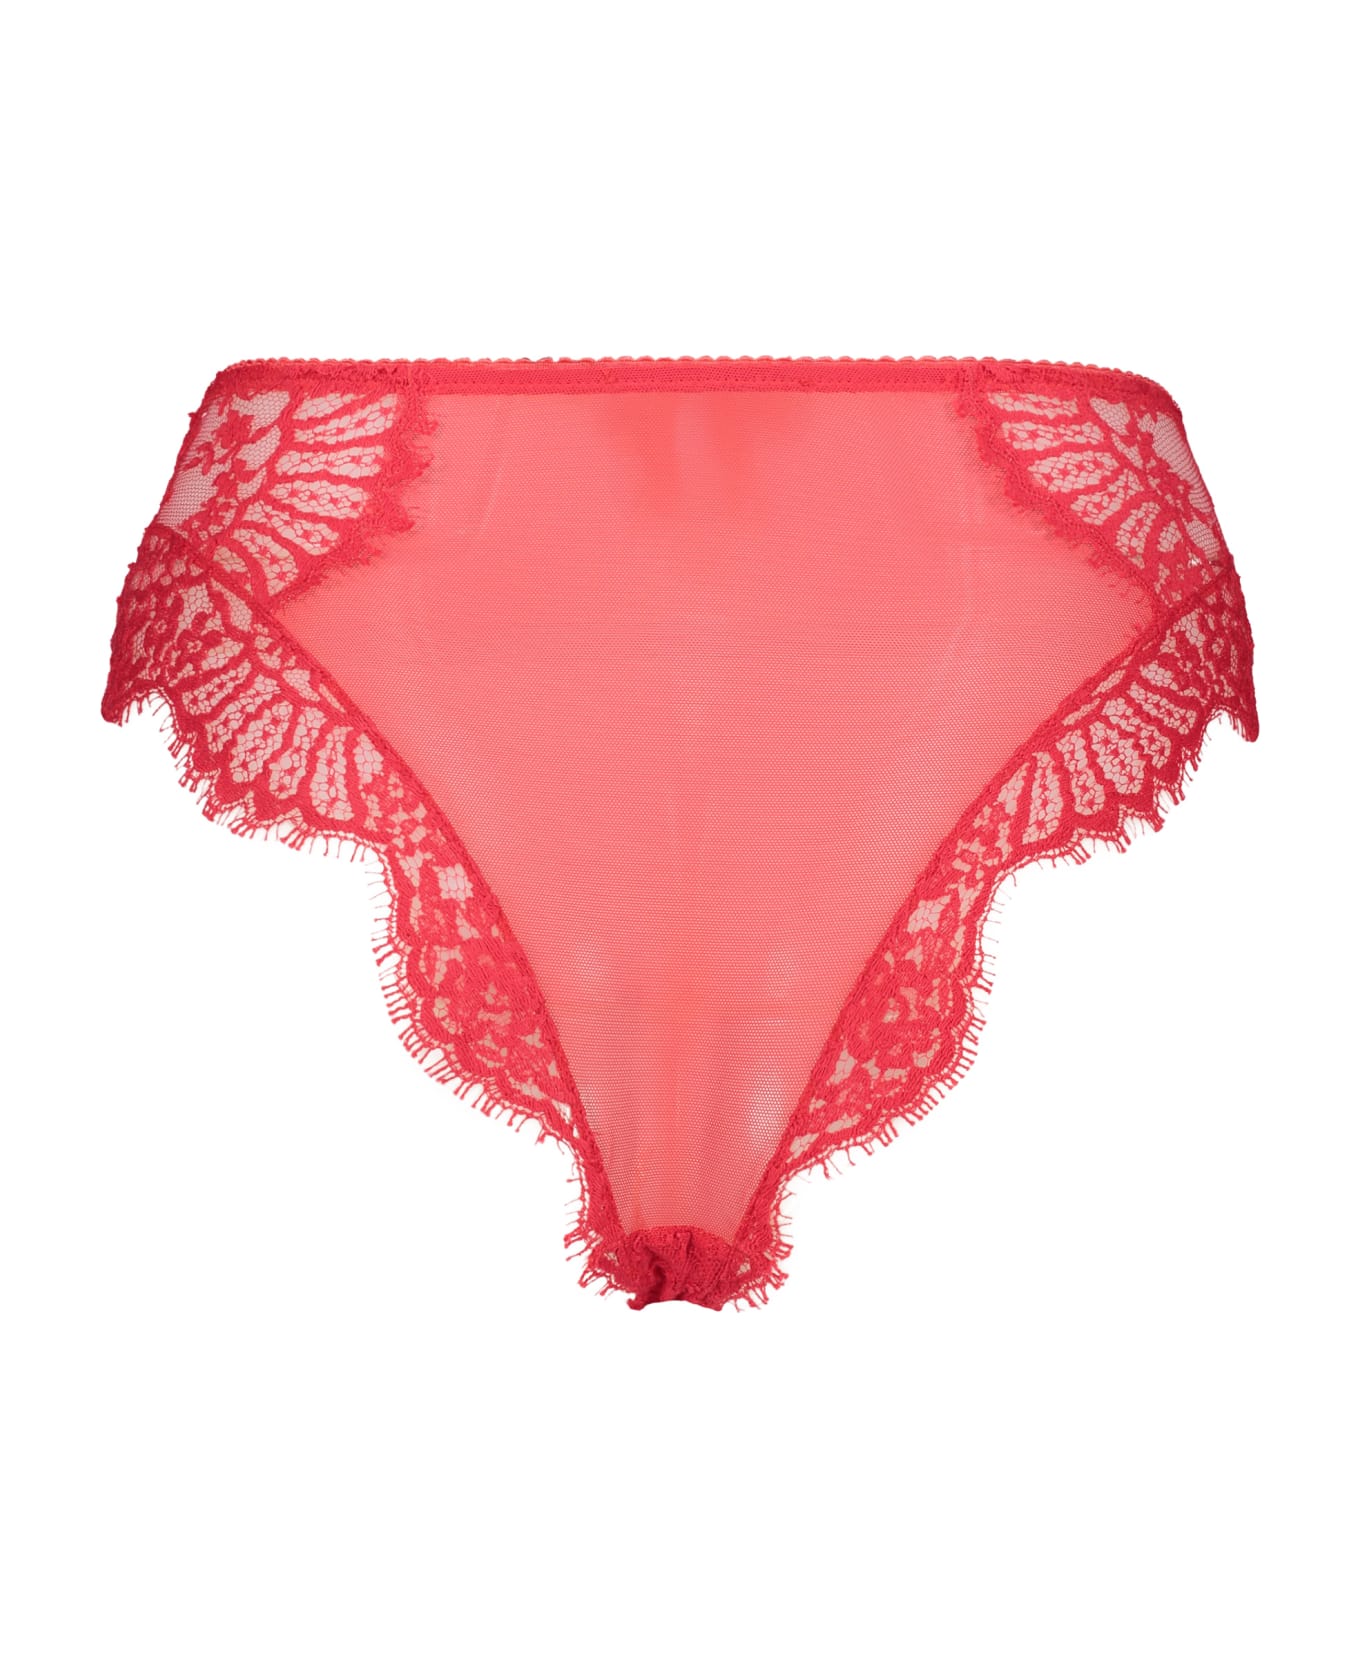 Dolce & Gabbana Lace Panties - red